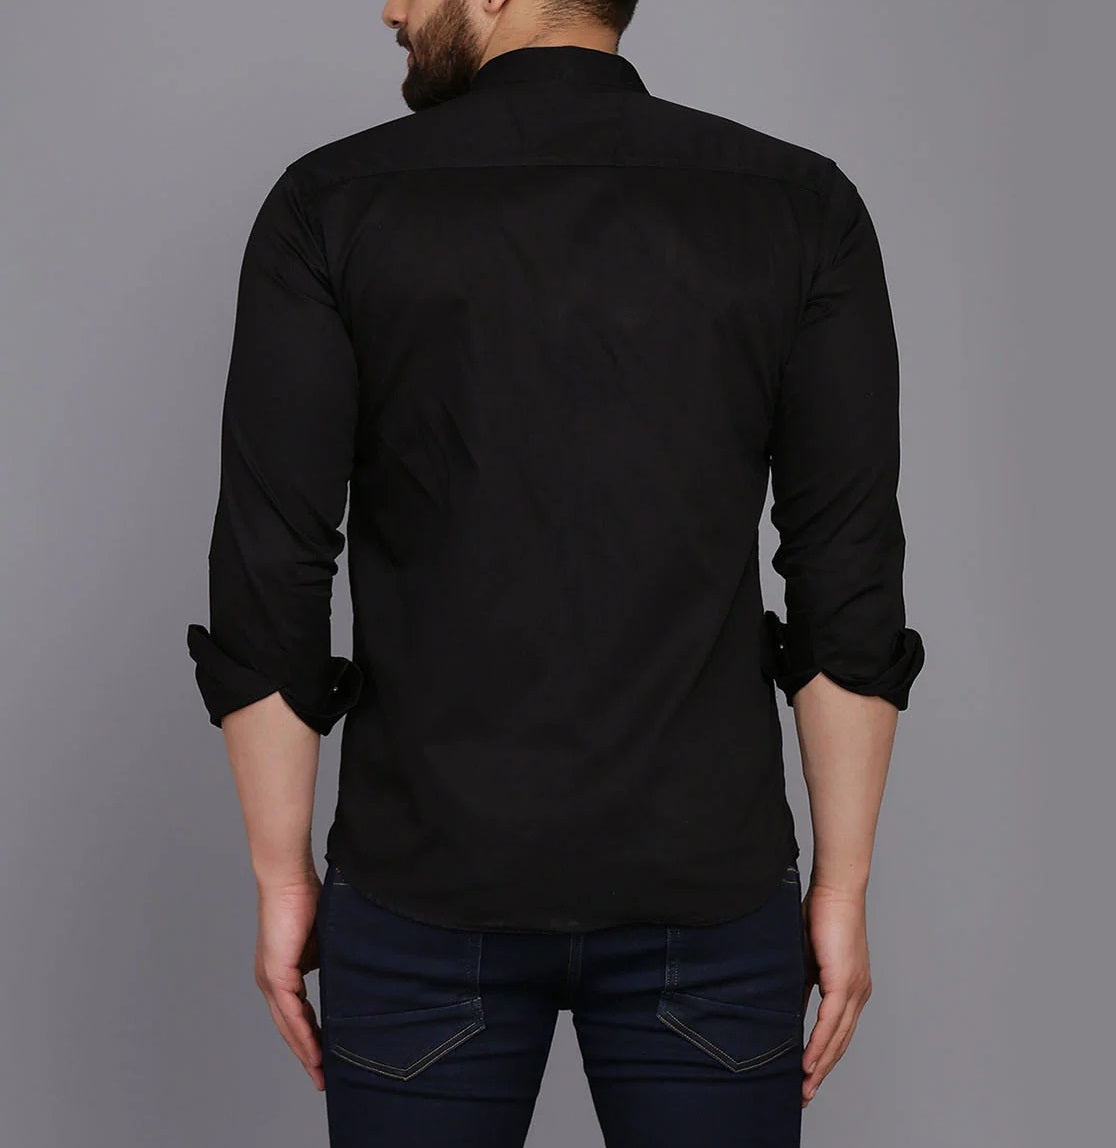 New Cotton Blend Solid Shirts (Black)